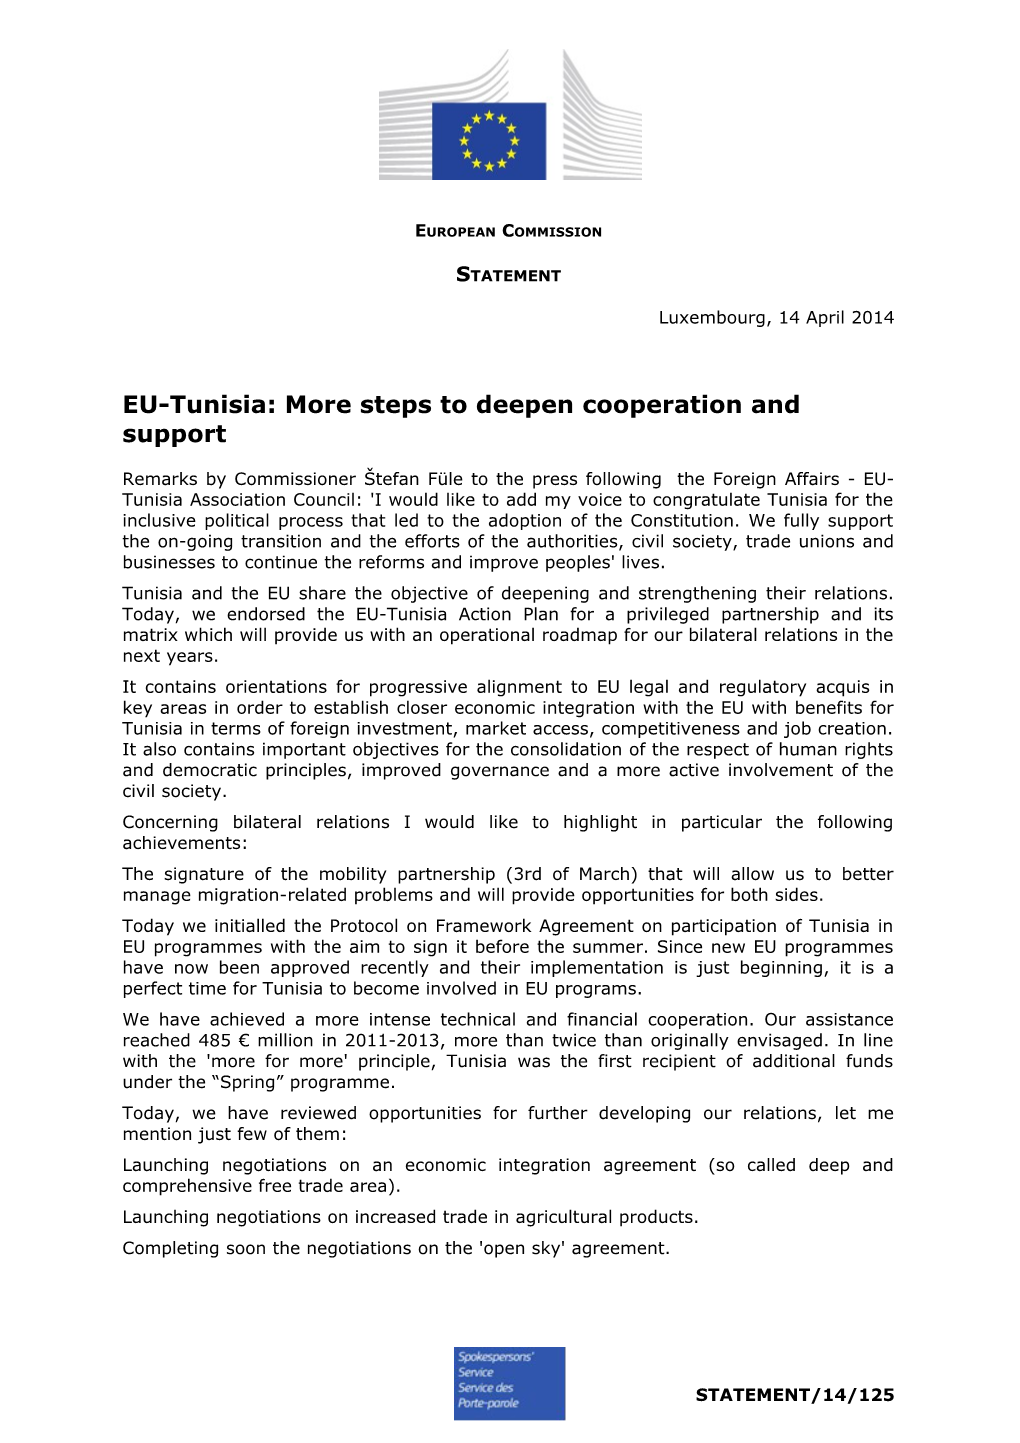 EU-Tunisia: More Steps to Deepen Cooperation and Support